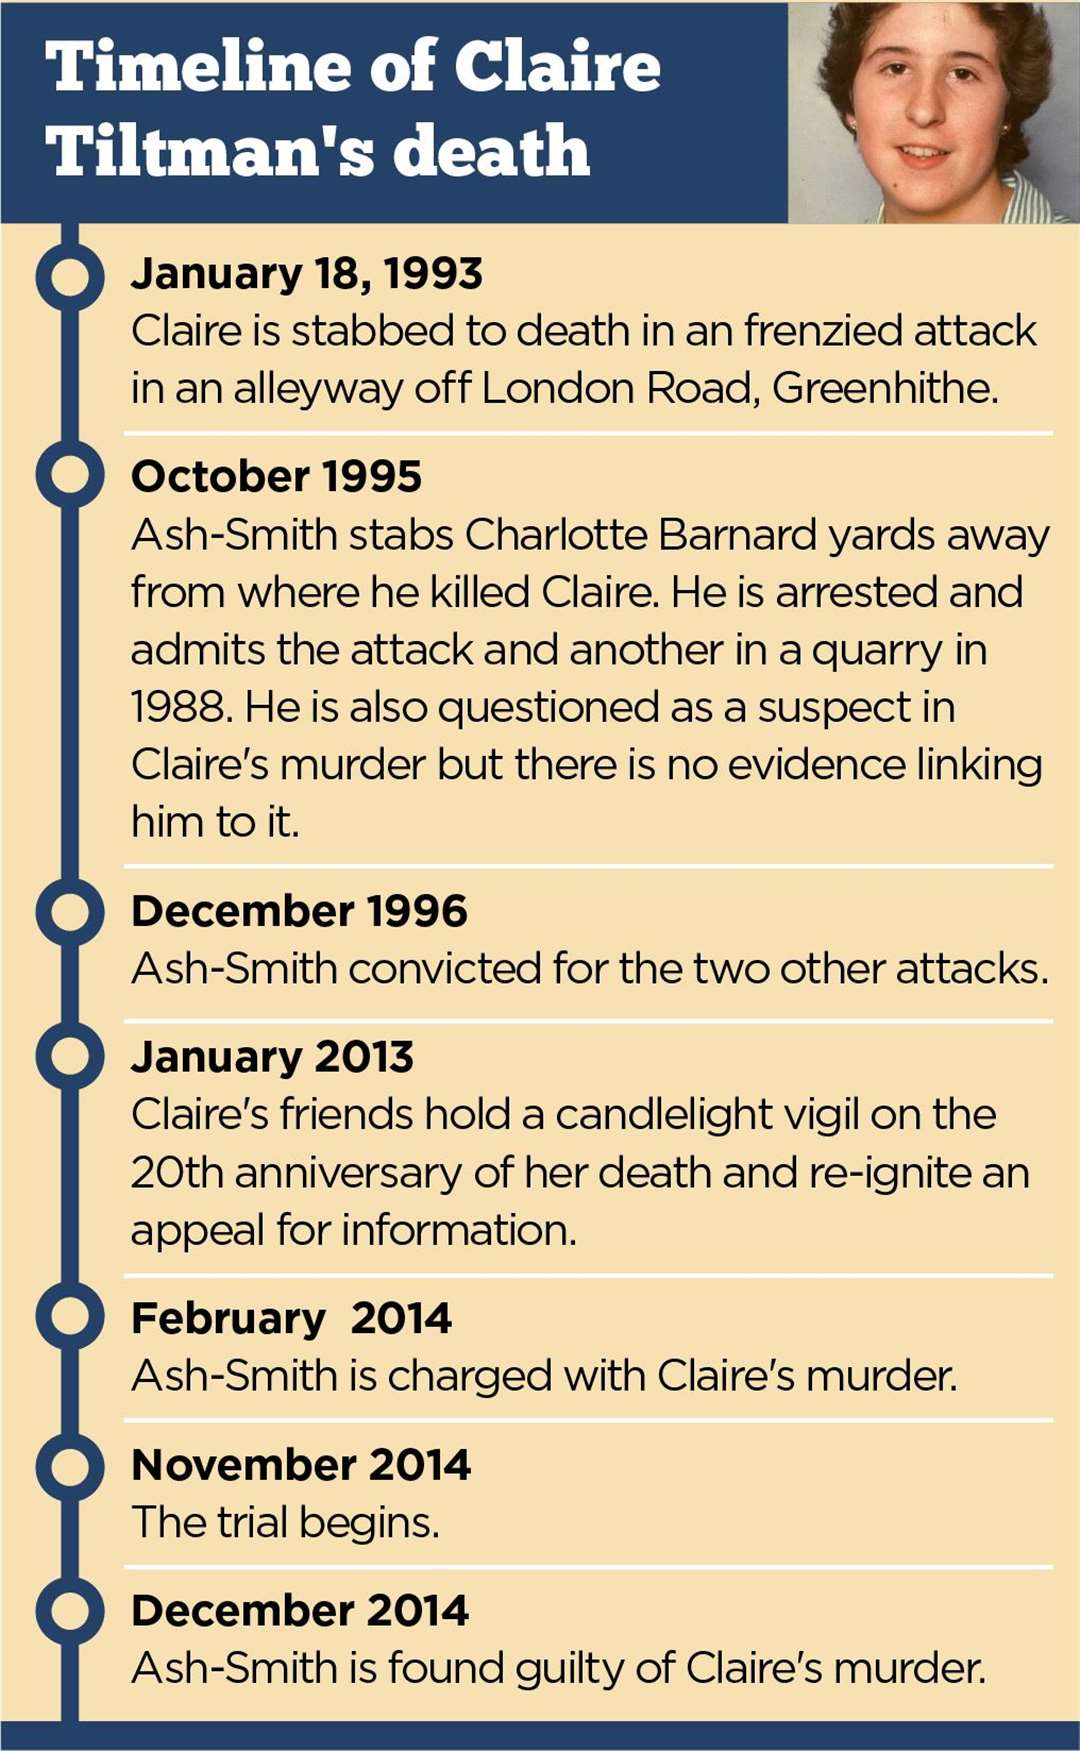 A timeline of her death